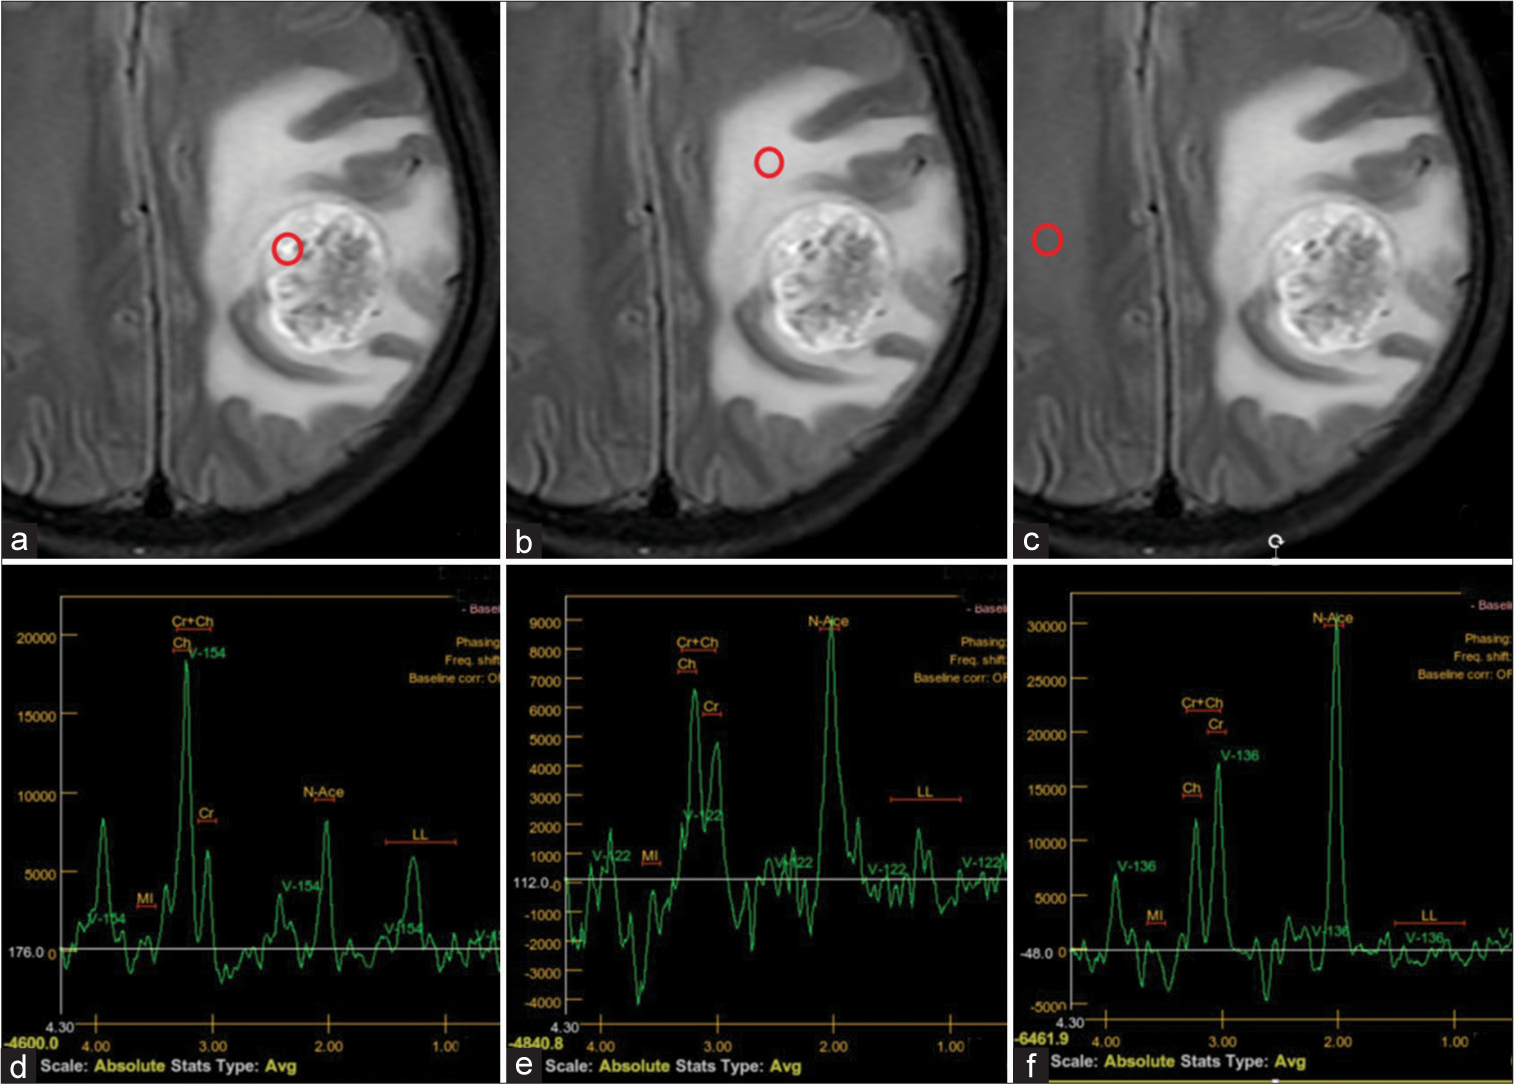 Left frontal-parietal glioblastoma in a 58-year-old female patient. (a-c) Positions of three regions of interest in the solid tumor component, peritumoral region, and contralateral benign white matter (indicated by red circles). (d-f) Magnetic resonance (MR) spectroscopy in the respective regions. (d) MR spectroscopic data of the solid tumor component reveals choline (Cho) elevation, N-acetylaspartate (NAA) reduction, and an elevated Cho/creatine ratio suggesting a tumor lesion. (e) MR spectroscopy of the peritumoral region shows increasing Cho and an increased Cho/NAA ratio in keeping with tumor infiltration. (f) Normal MR spectroscopy of contralateral benign white matter.